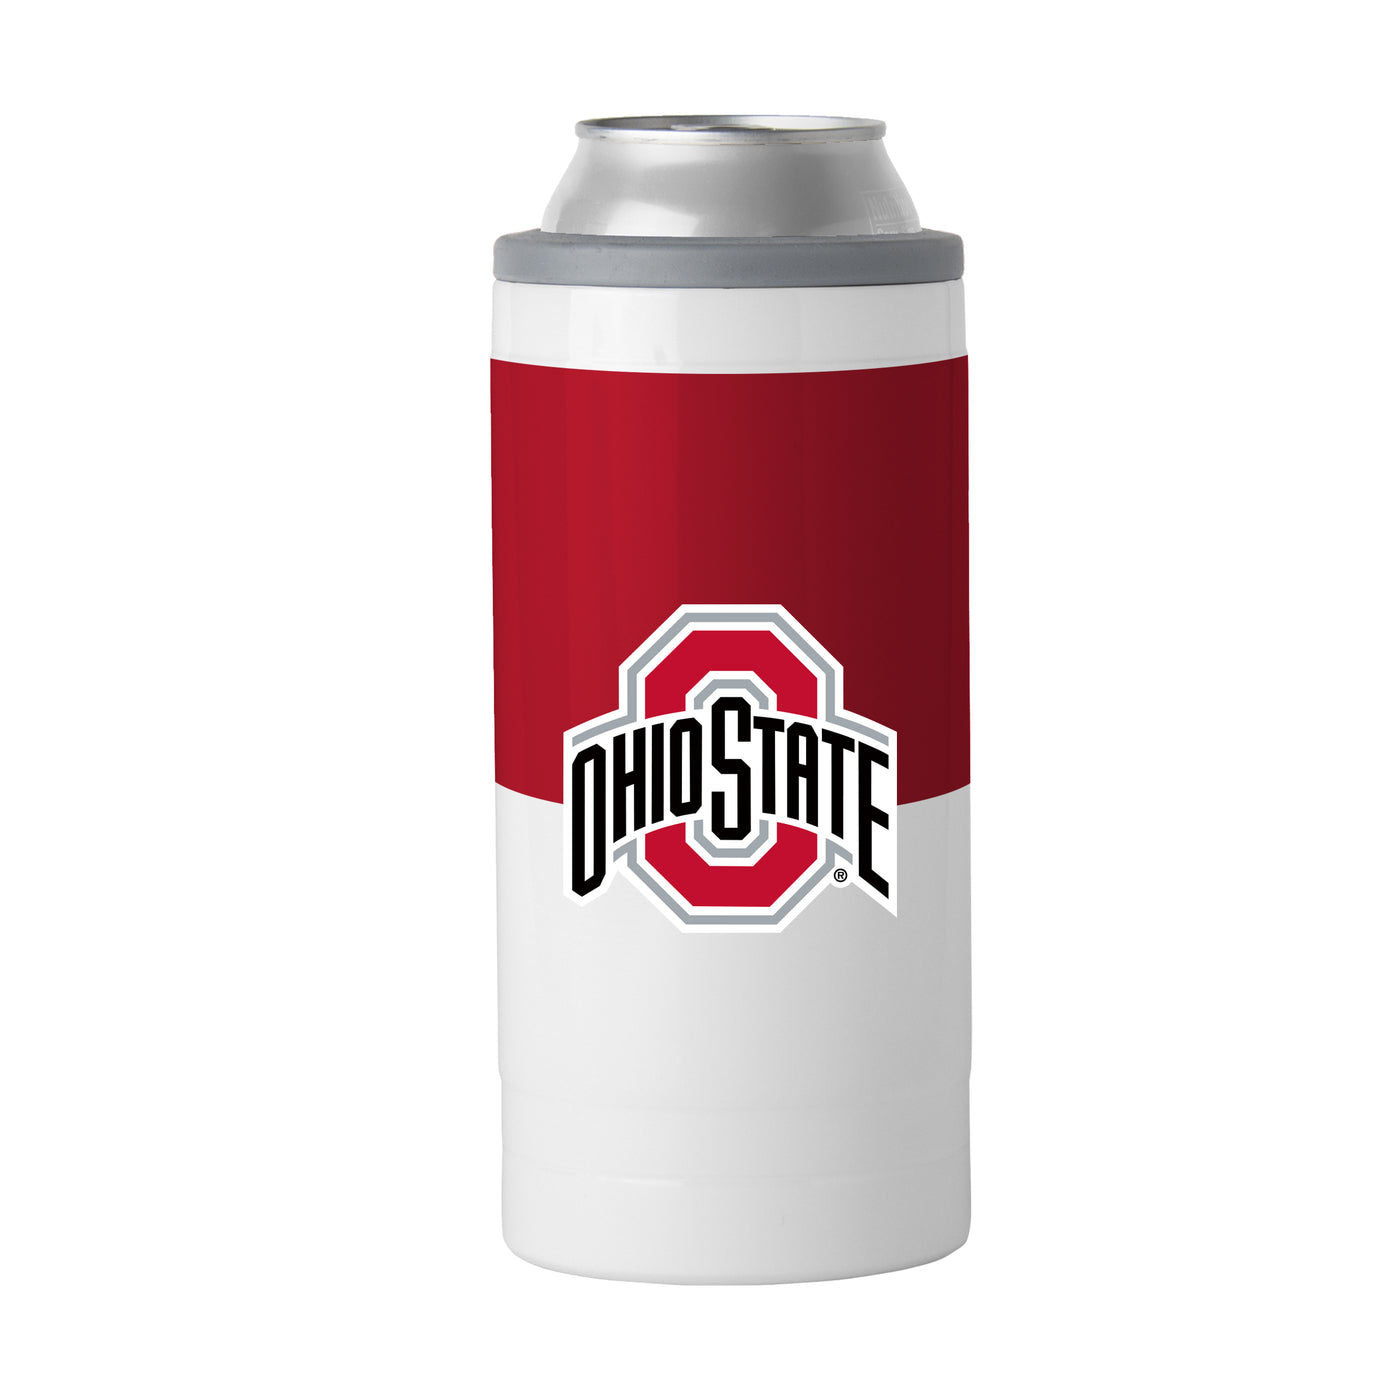 Ohio State Colorblock 12oz Slim Can Coolie